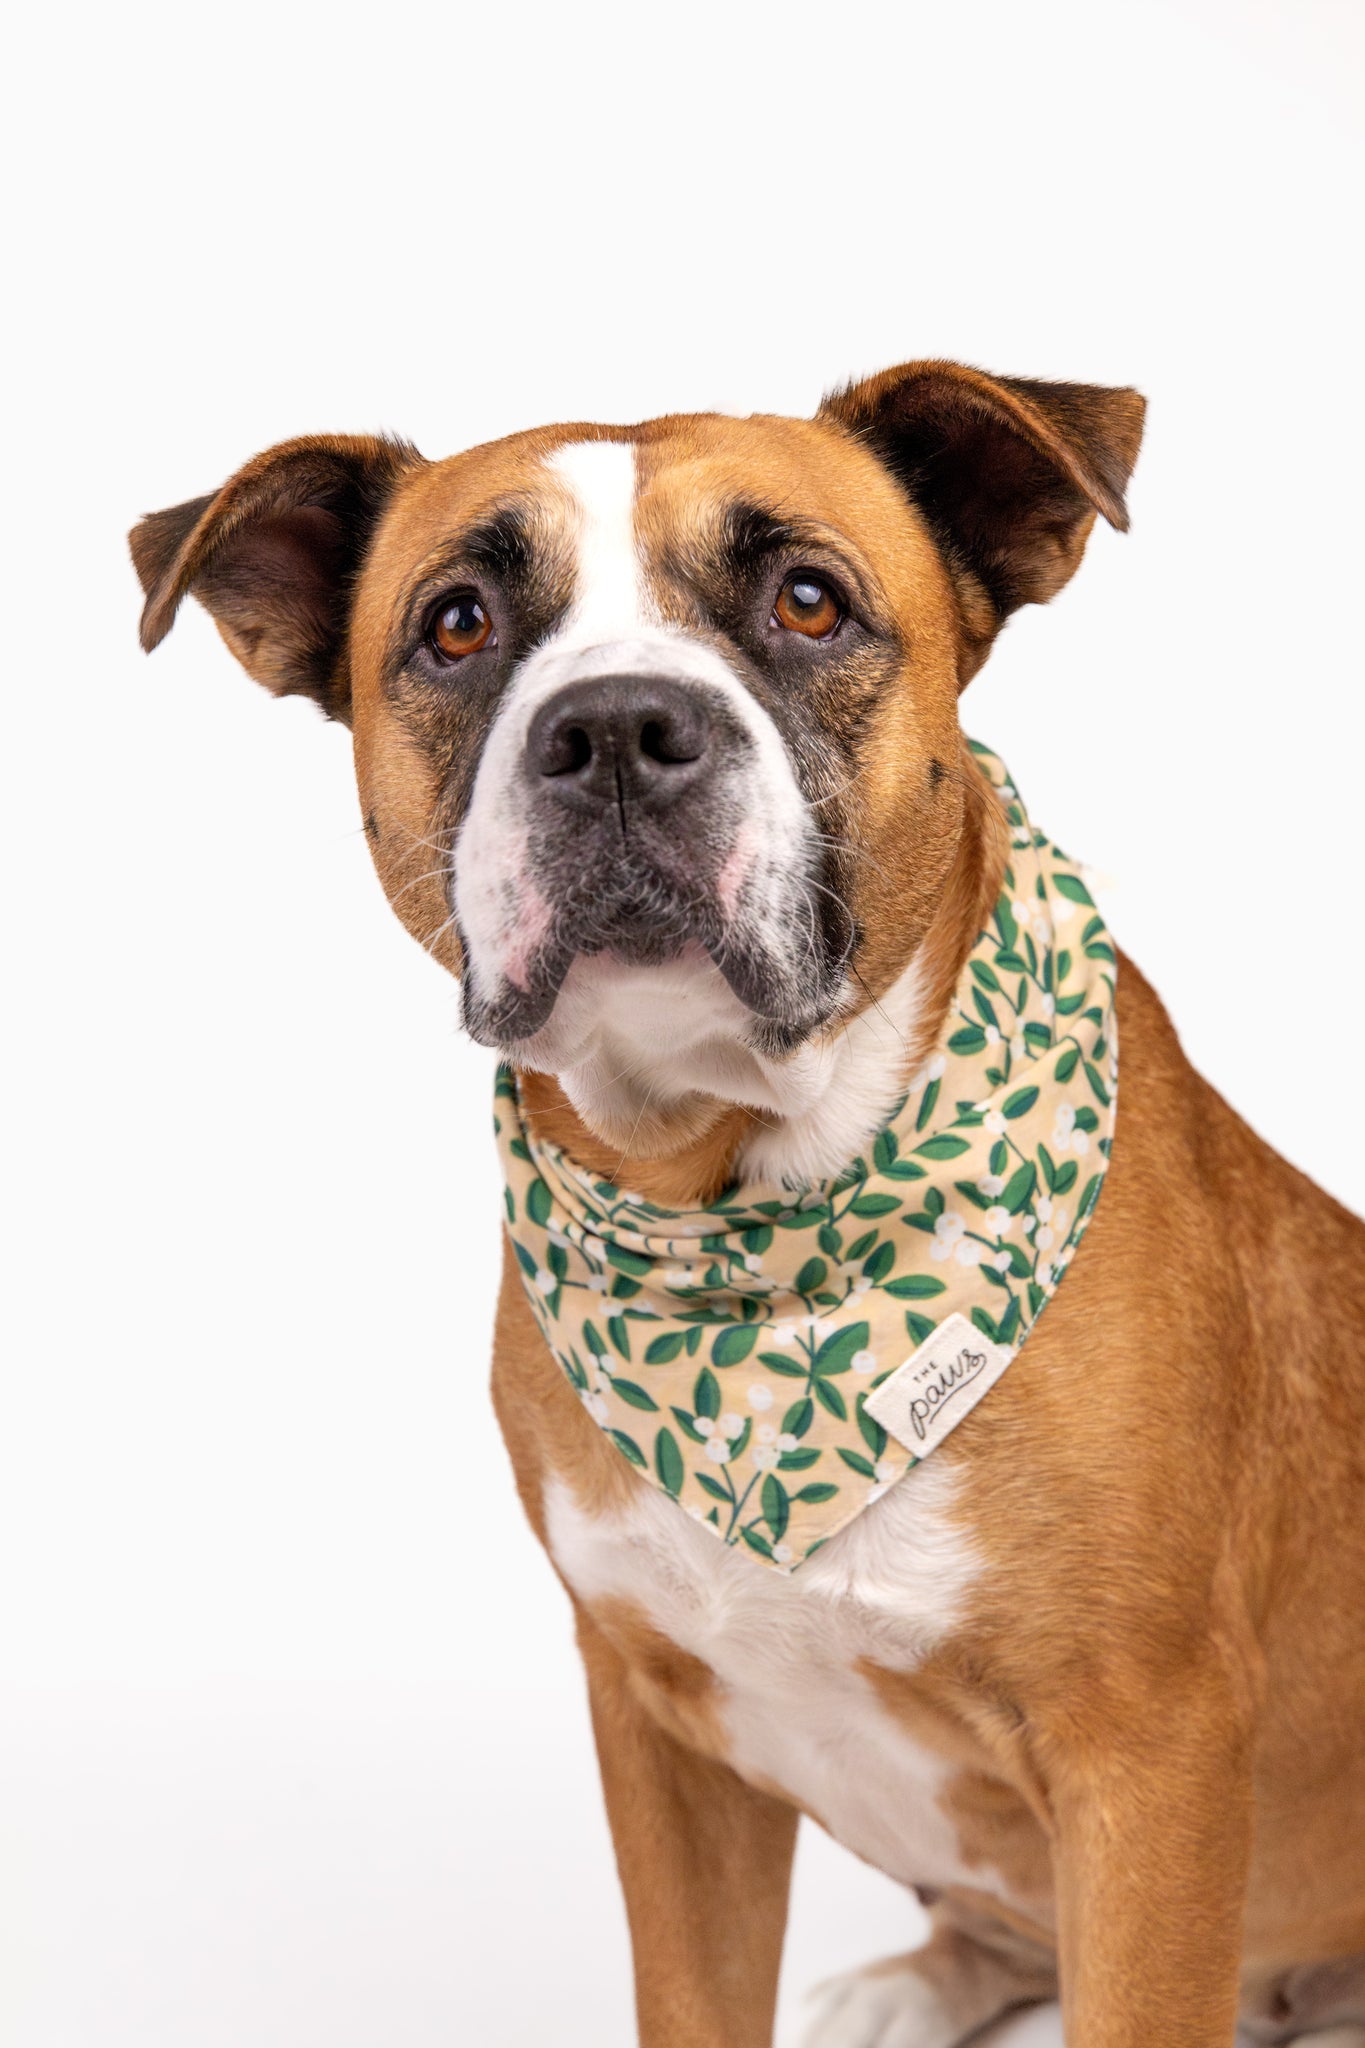 Winter Berry - Dog Bandana from The Paws